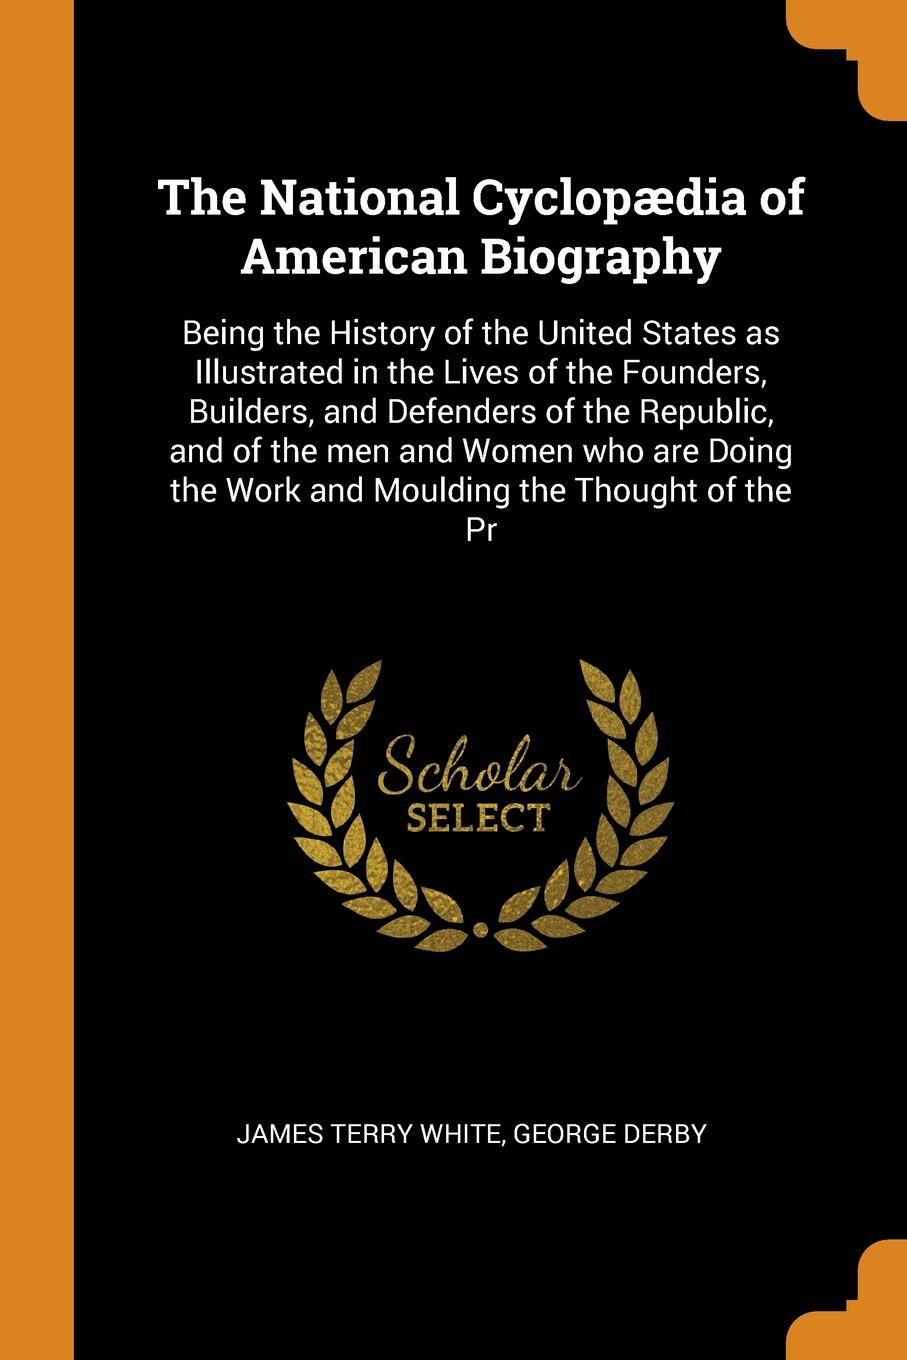 The National Cyclopaedia of American Biography. Being the History of the United States as Illustrated in the Lives of the Founders, Builders, and Defenders of the Republic, and of the men and Women who are Doing the Work and Moulding the Thought o...